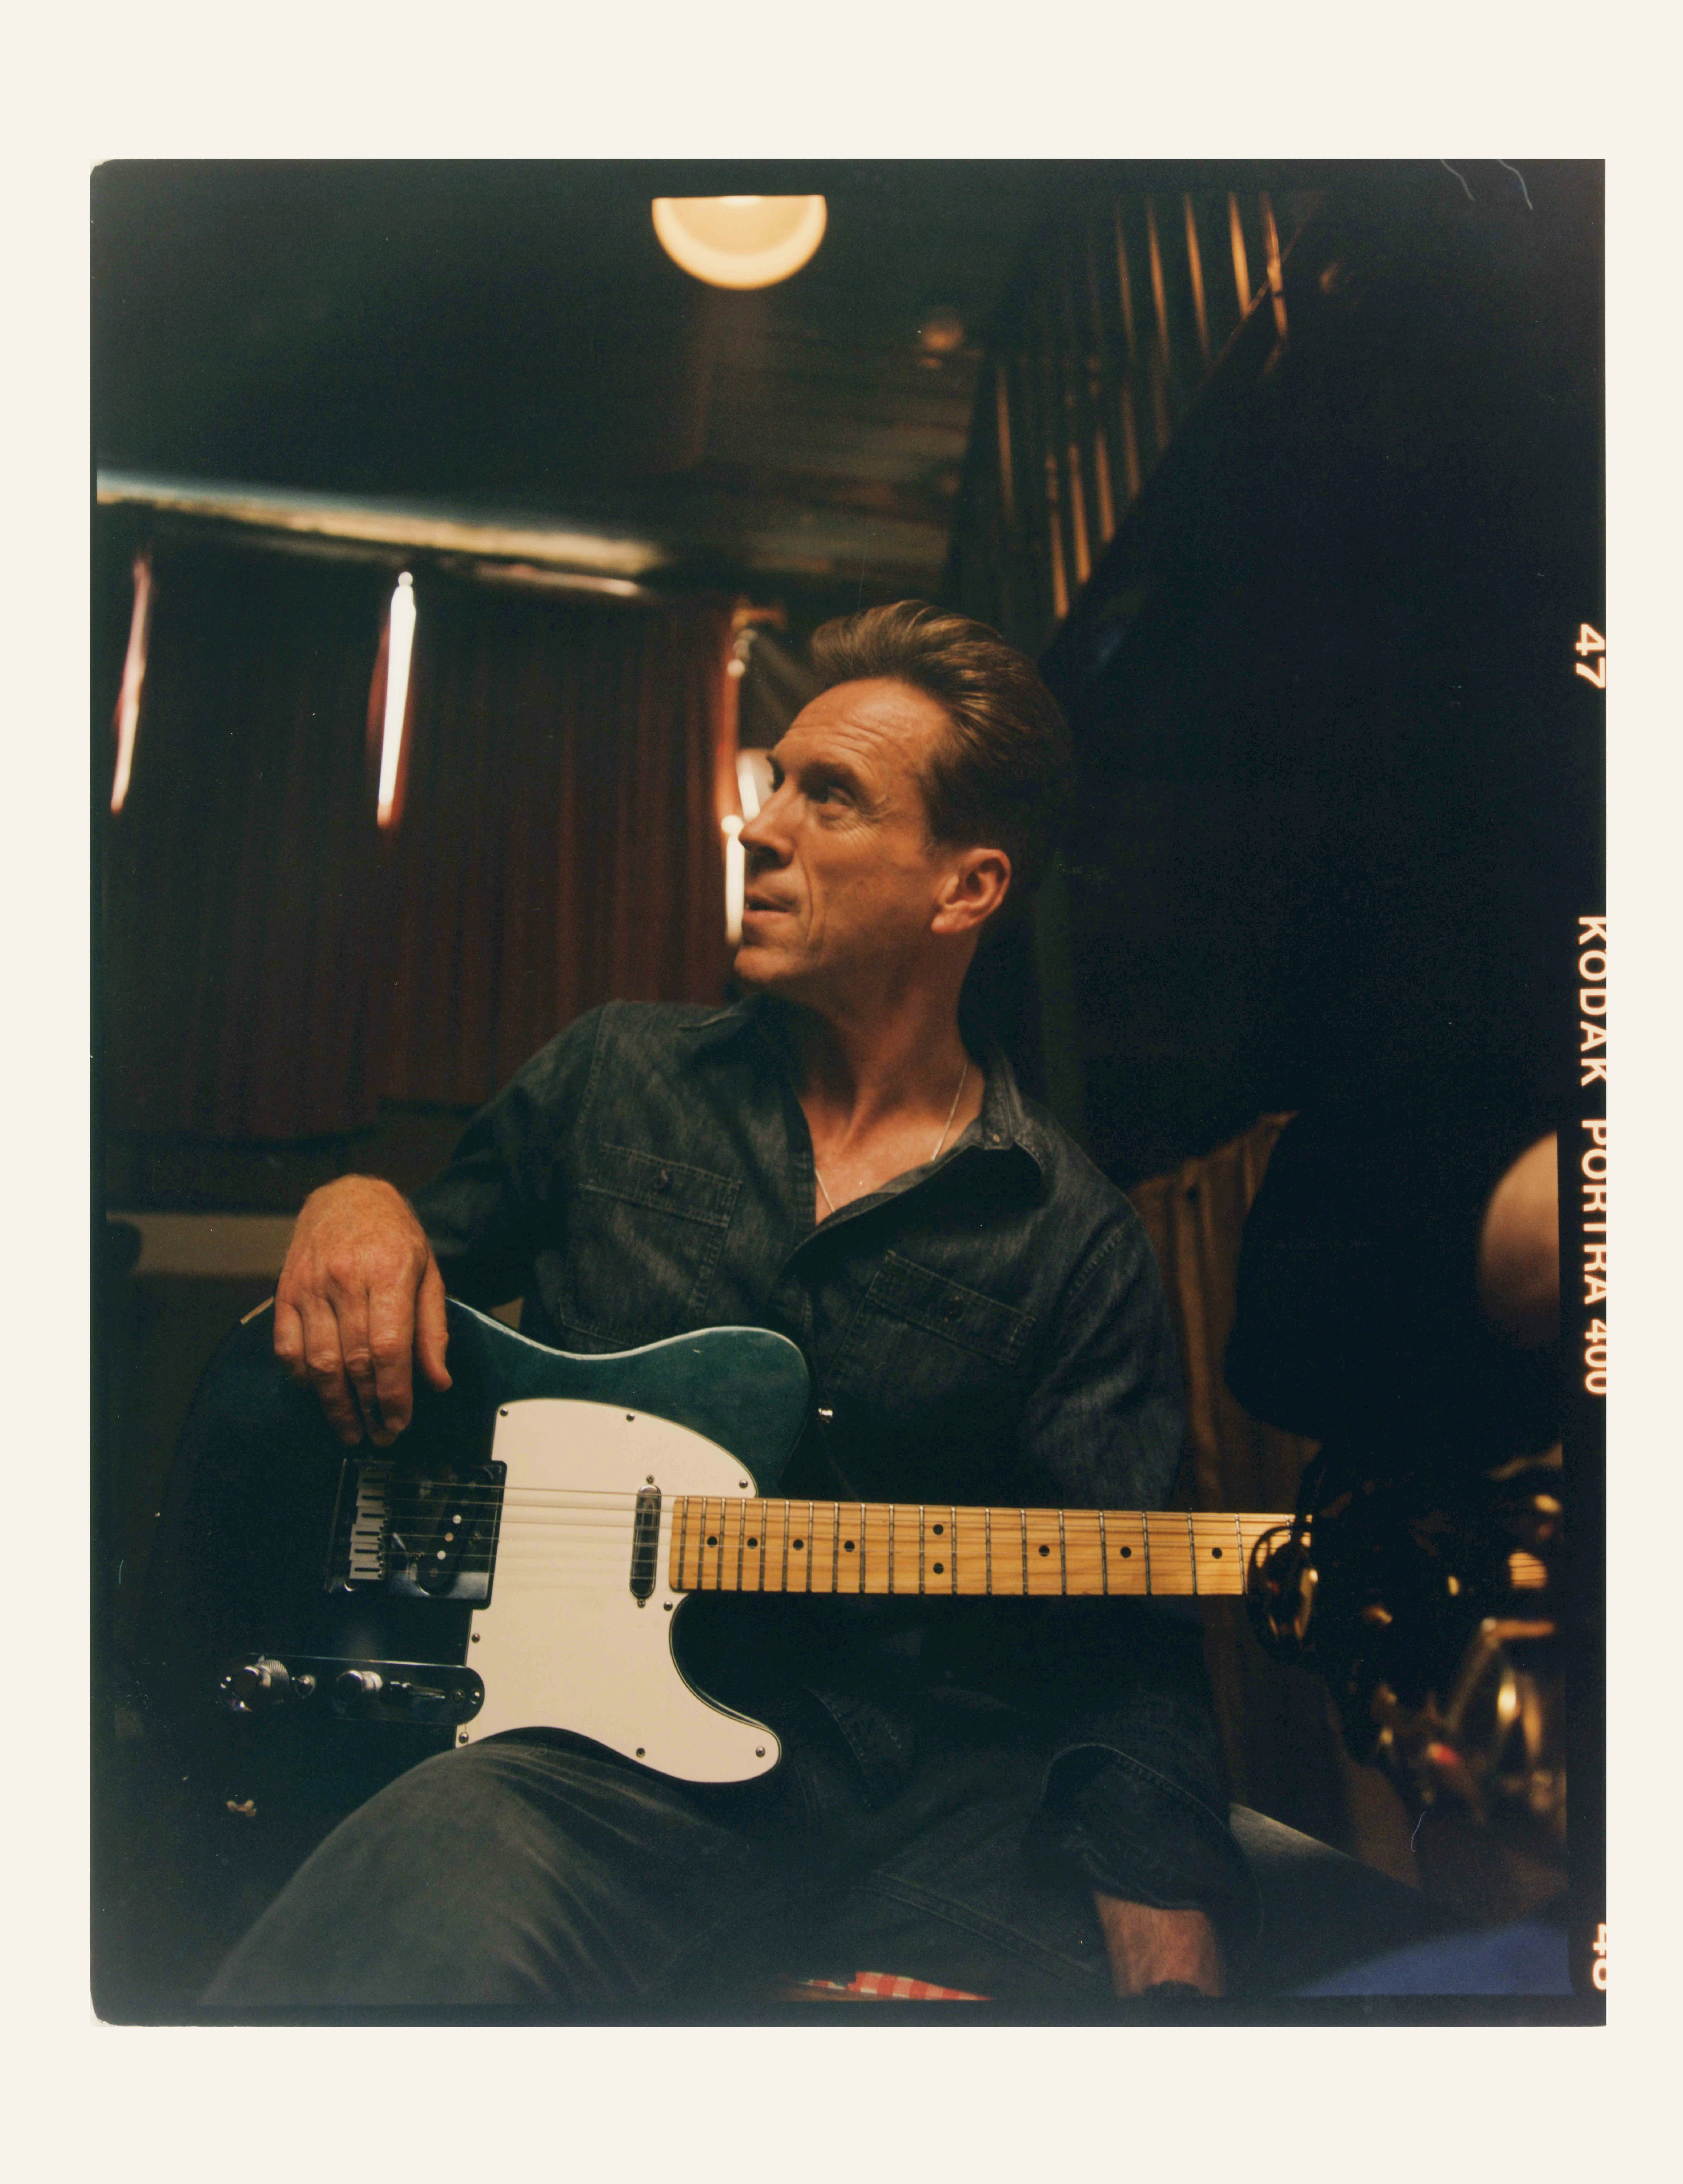 A man sits with an electric guitar on his lap